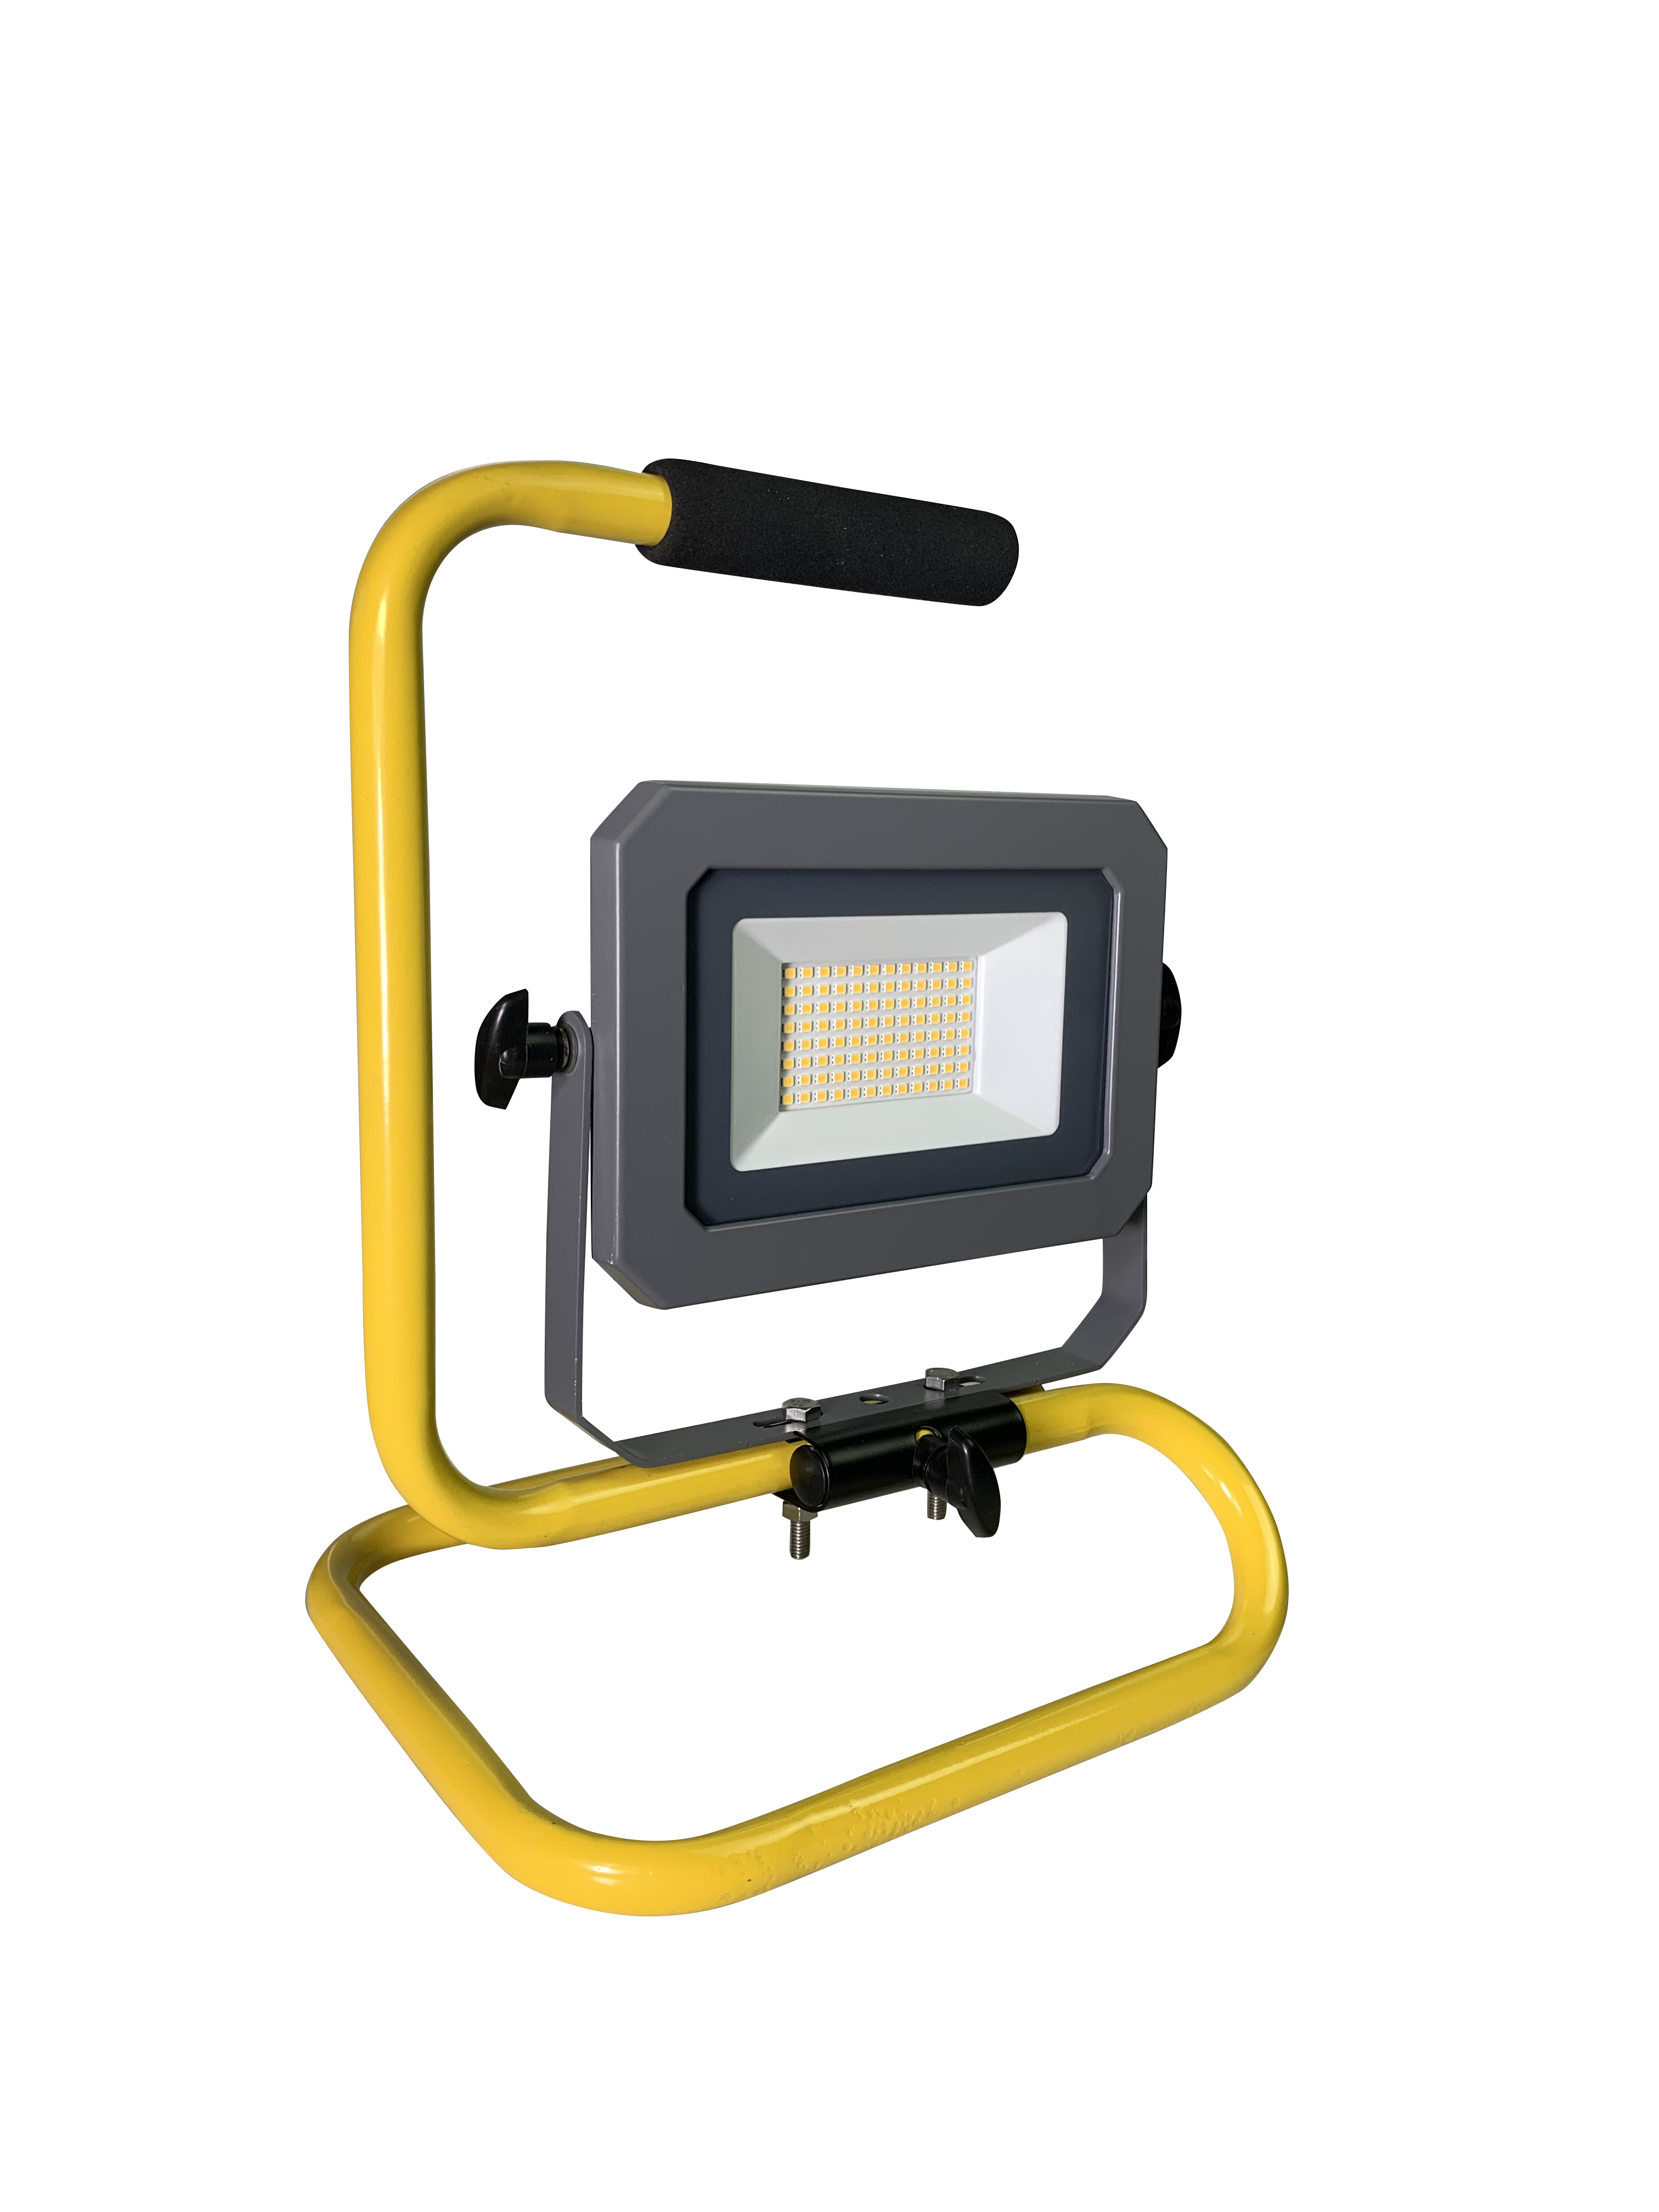 LED work light with S bracket Featured Image